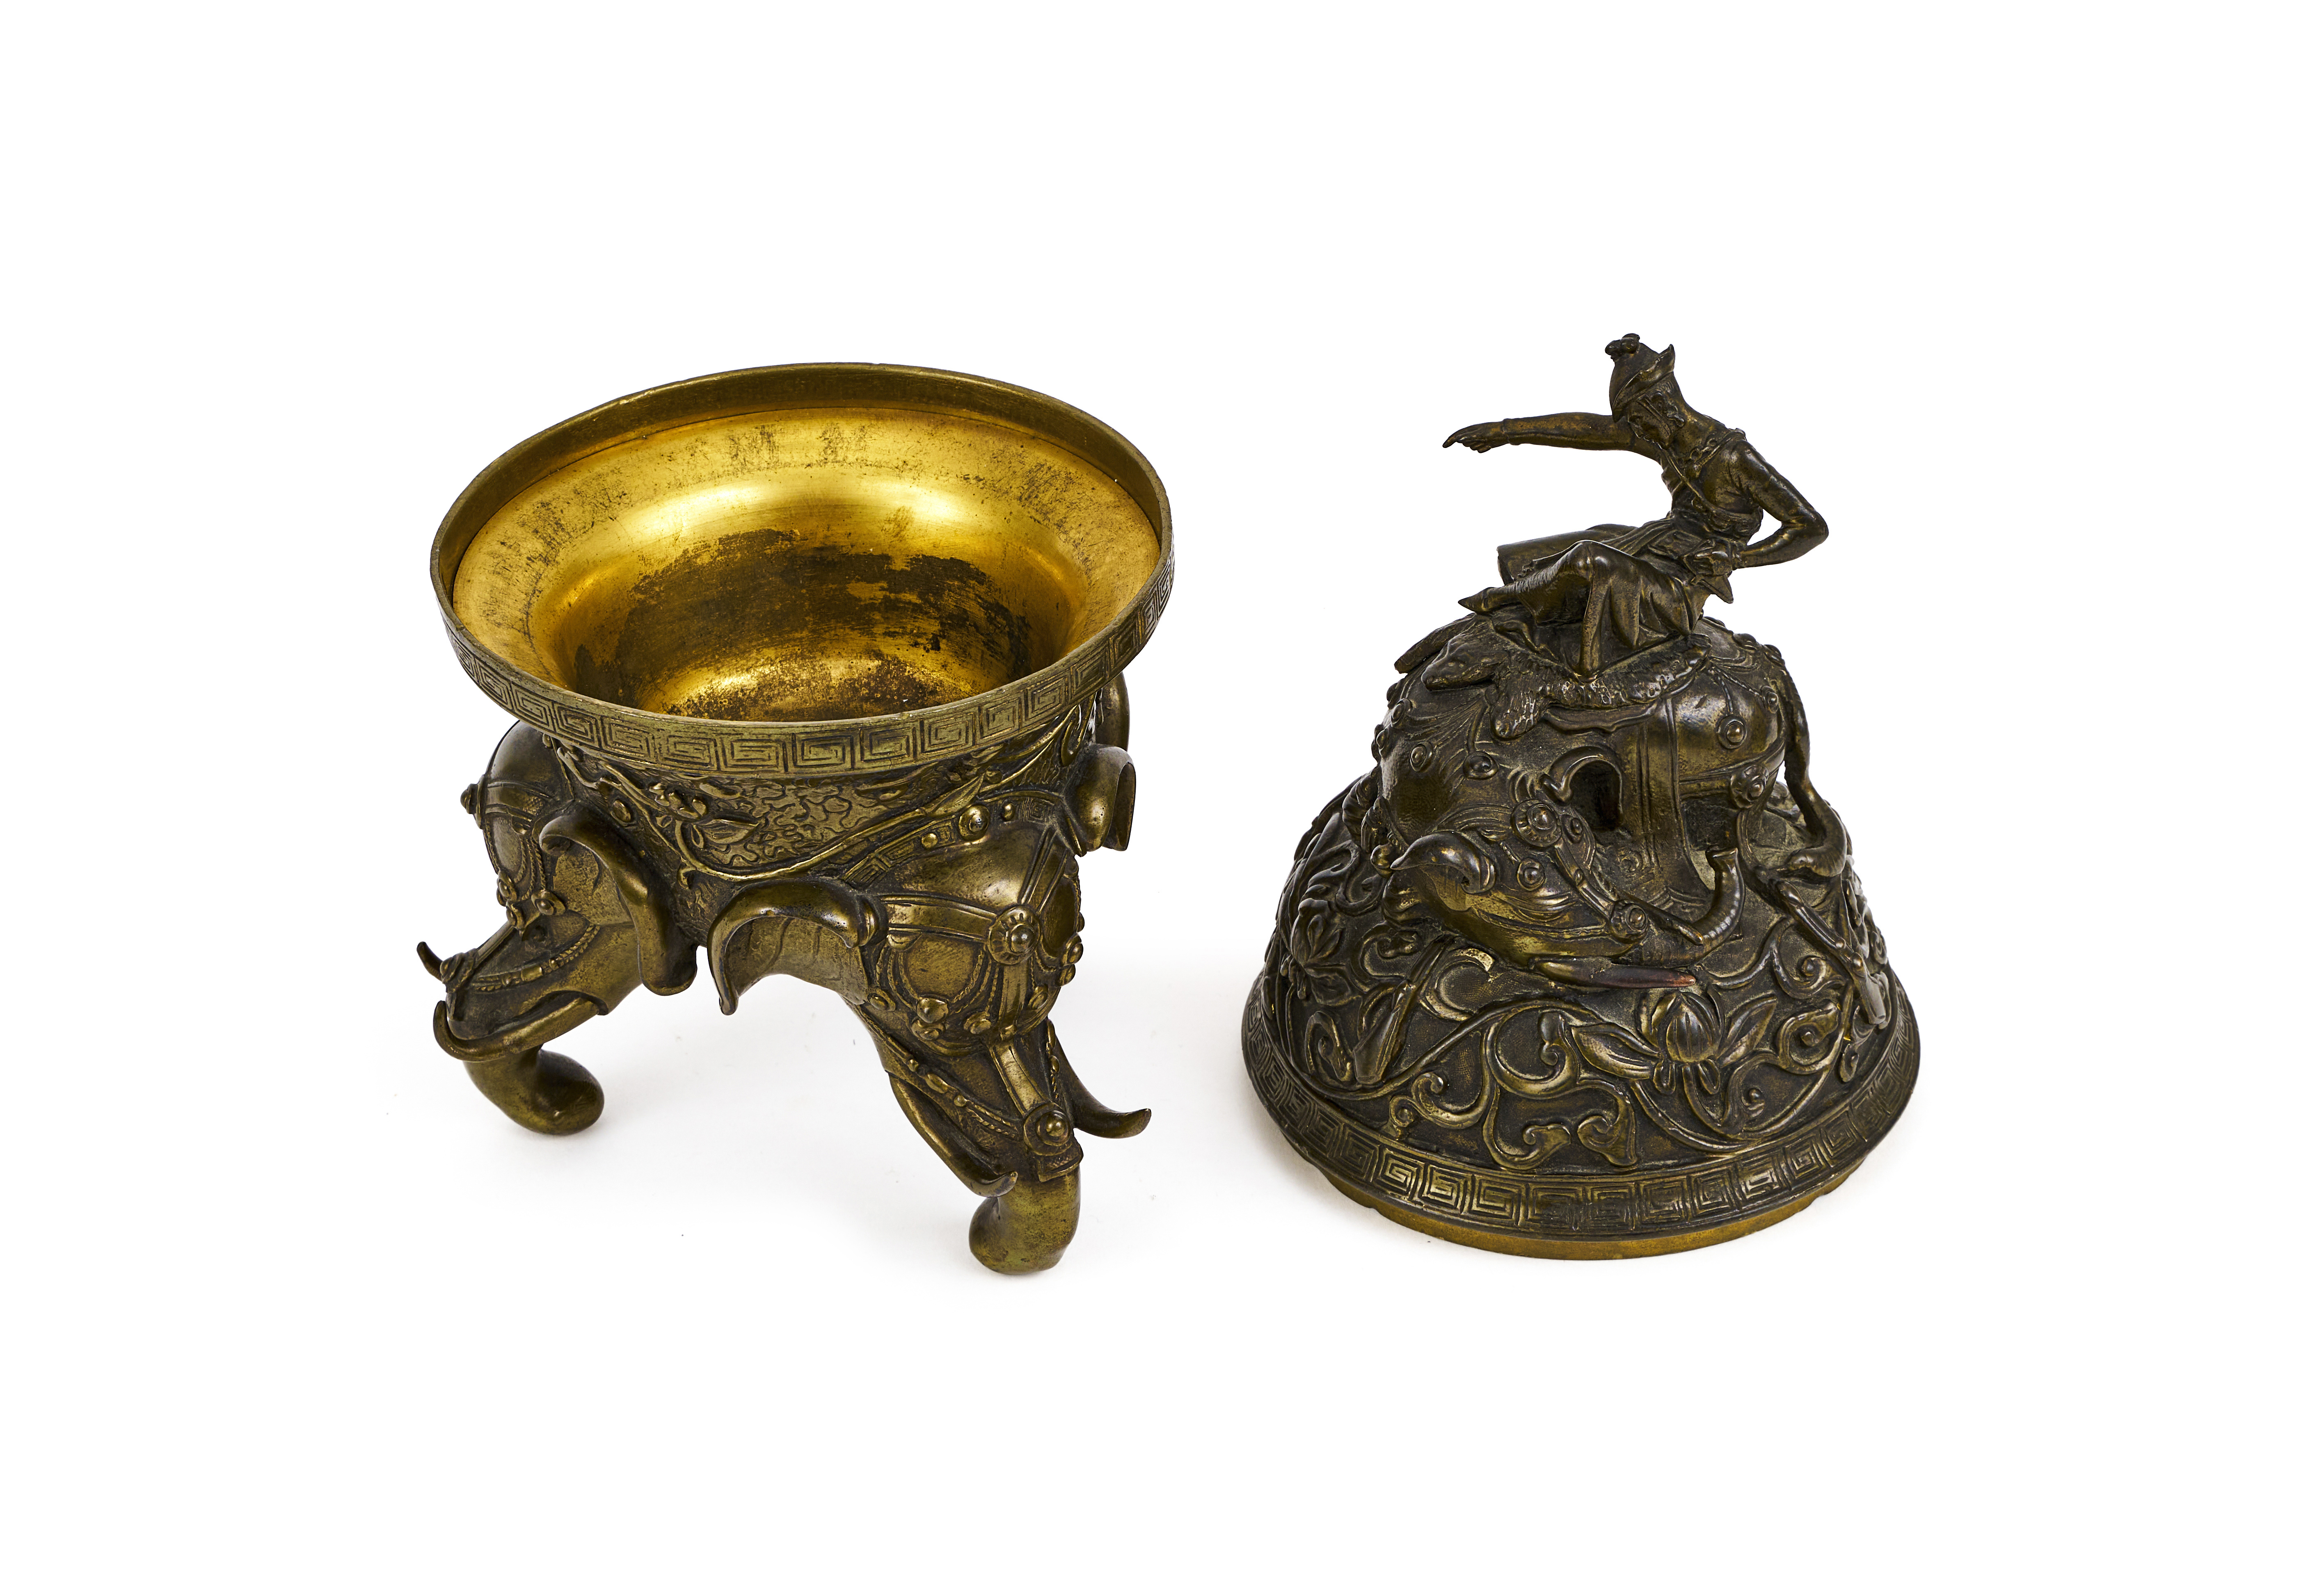 A LARGE CHINESE INCENSE BURNER MADE FOR EUROPEAN MARKET, QING DYNASTY (1644-1911) - Image 3 of 4